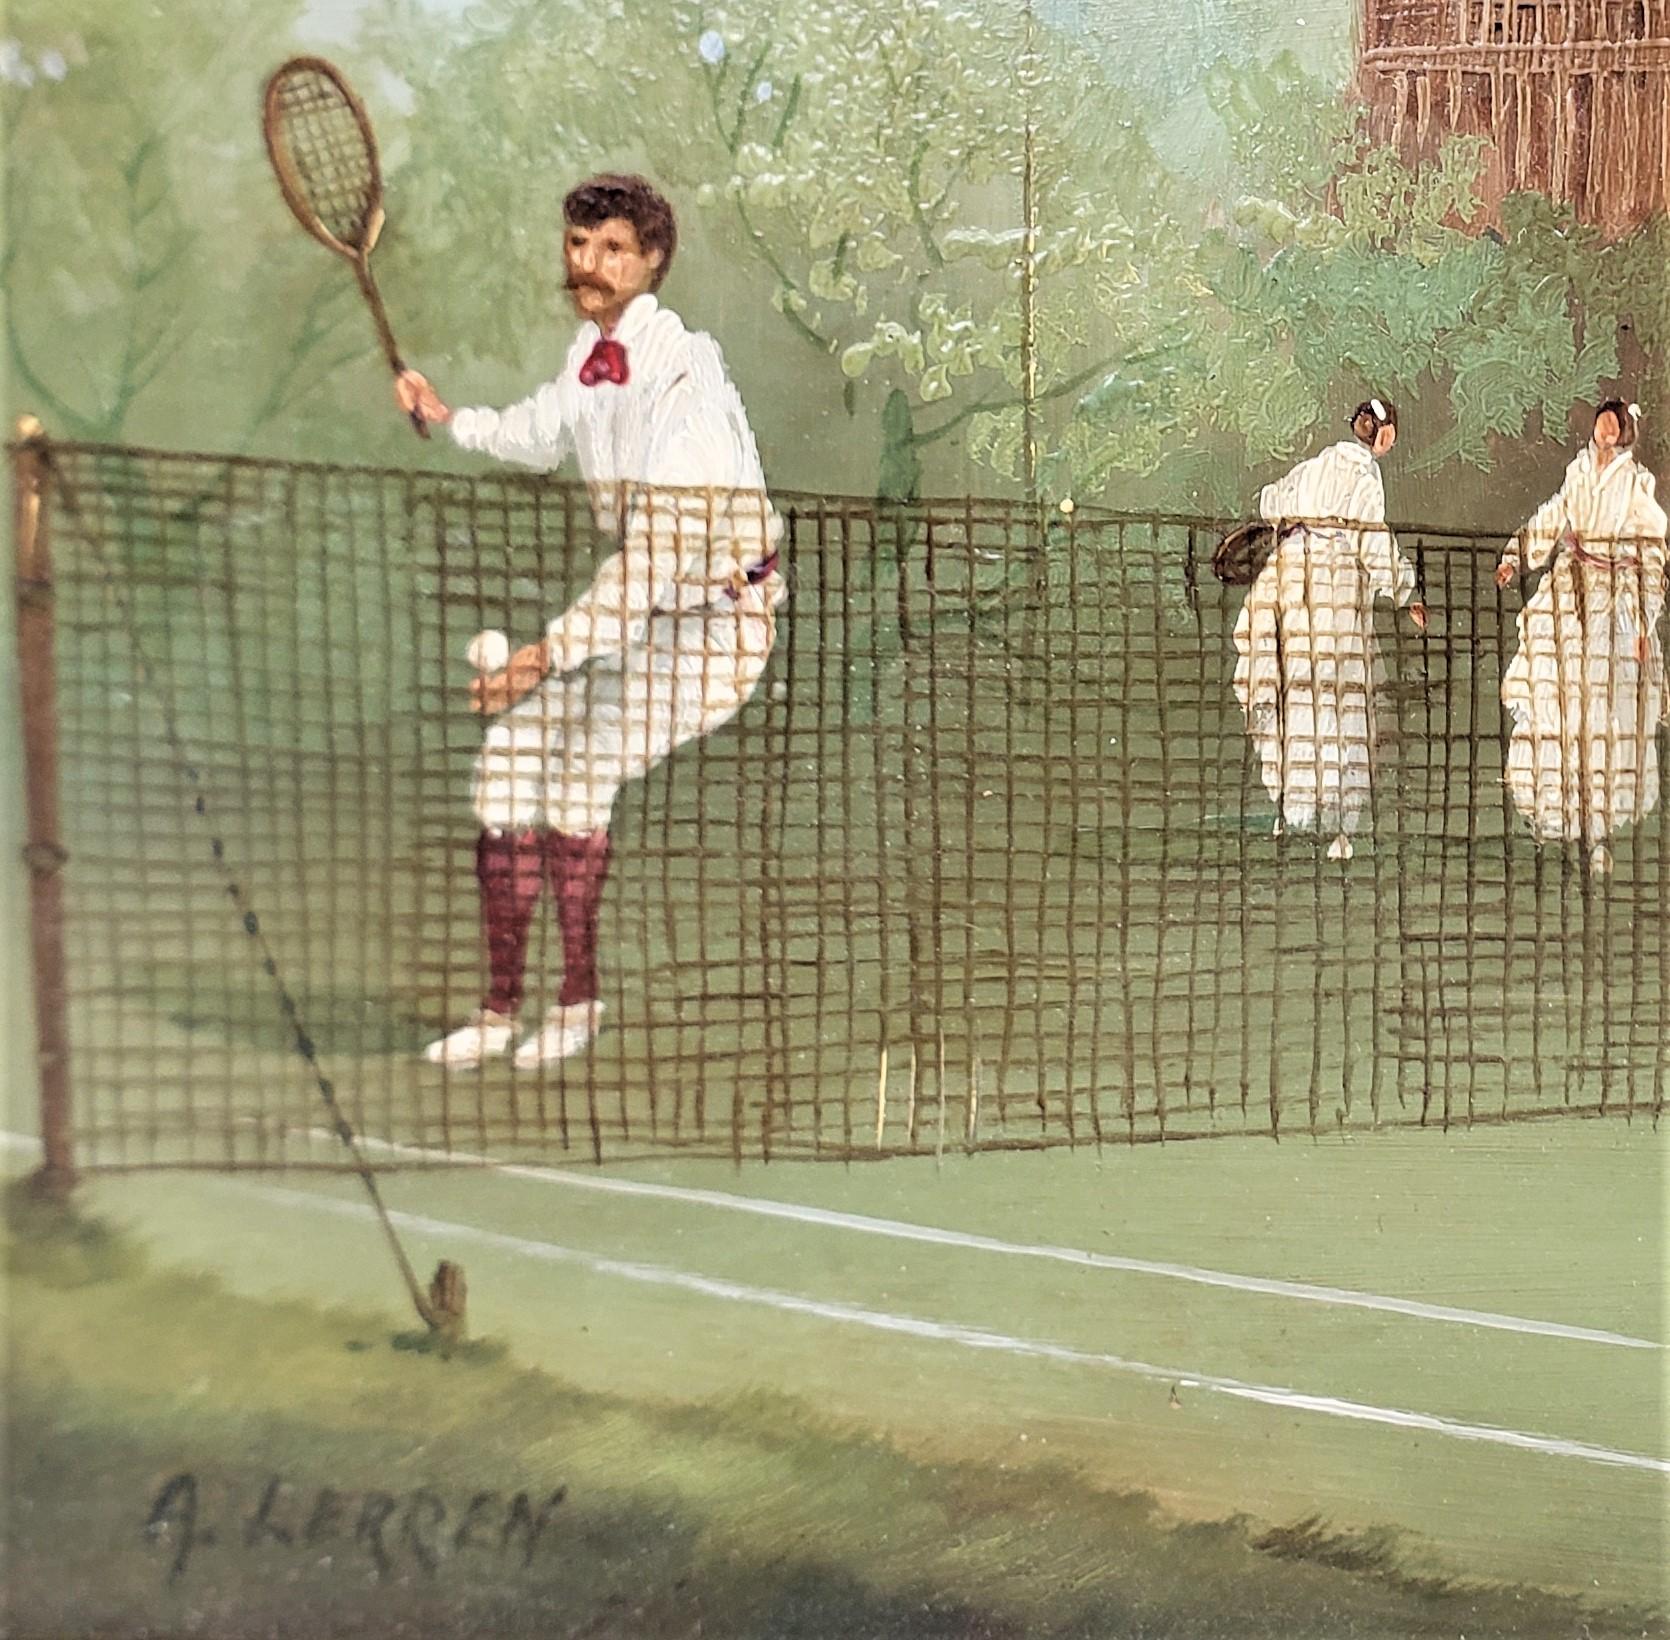 A. Larren Signed Original Oil on Copper Painting Depicting Tennis Players In Good Condition For Sale In Hamilton, Ontario